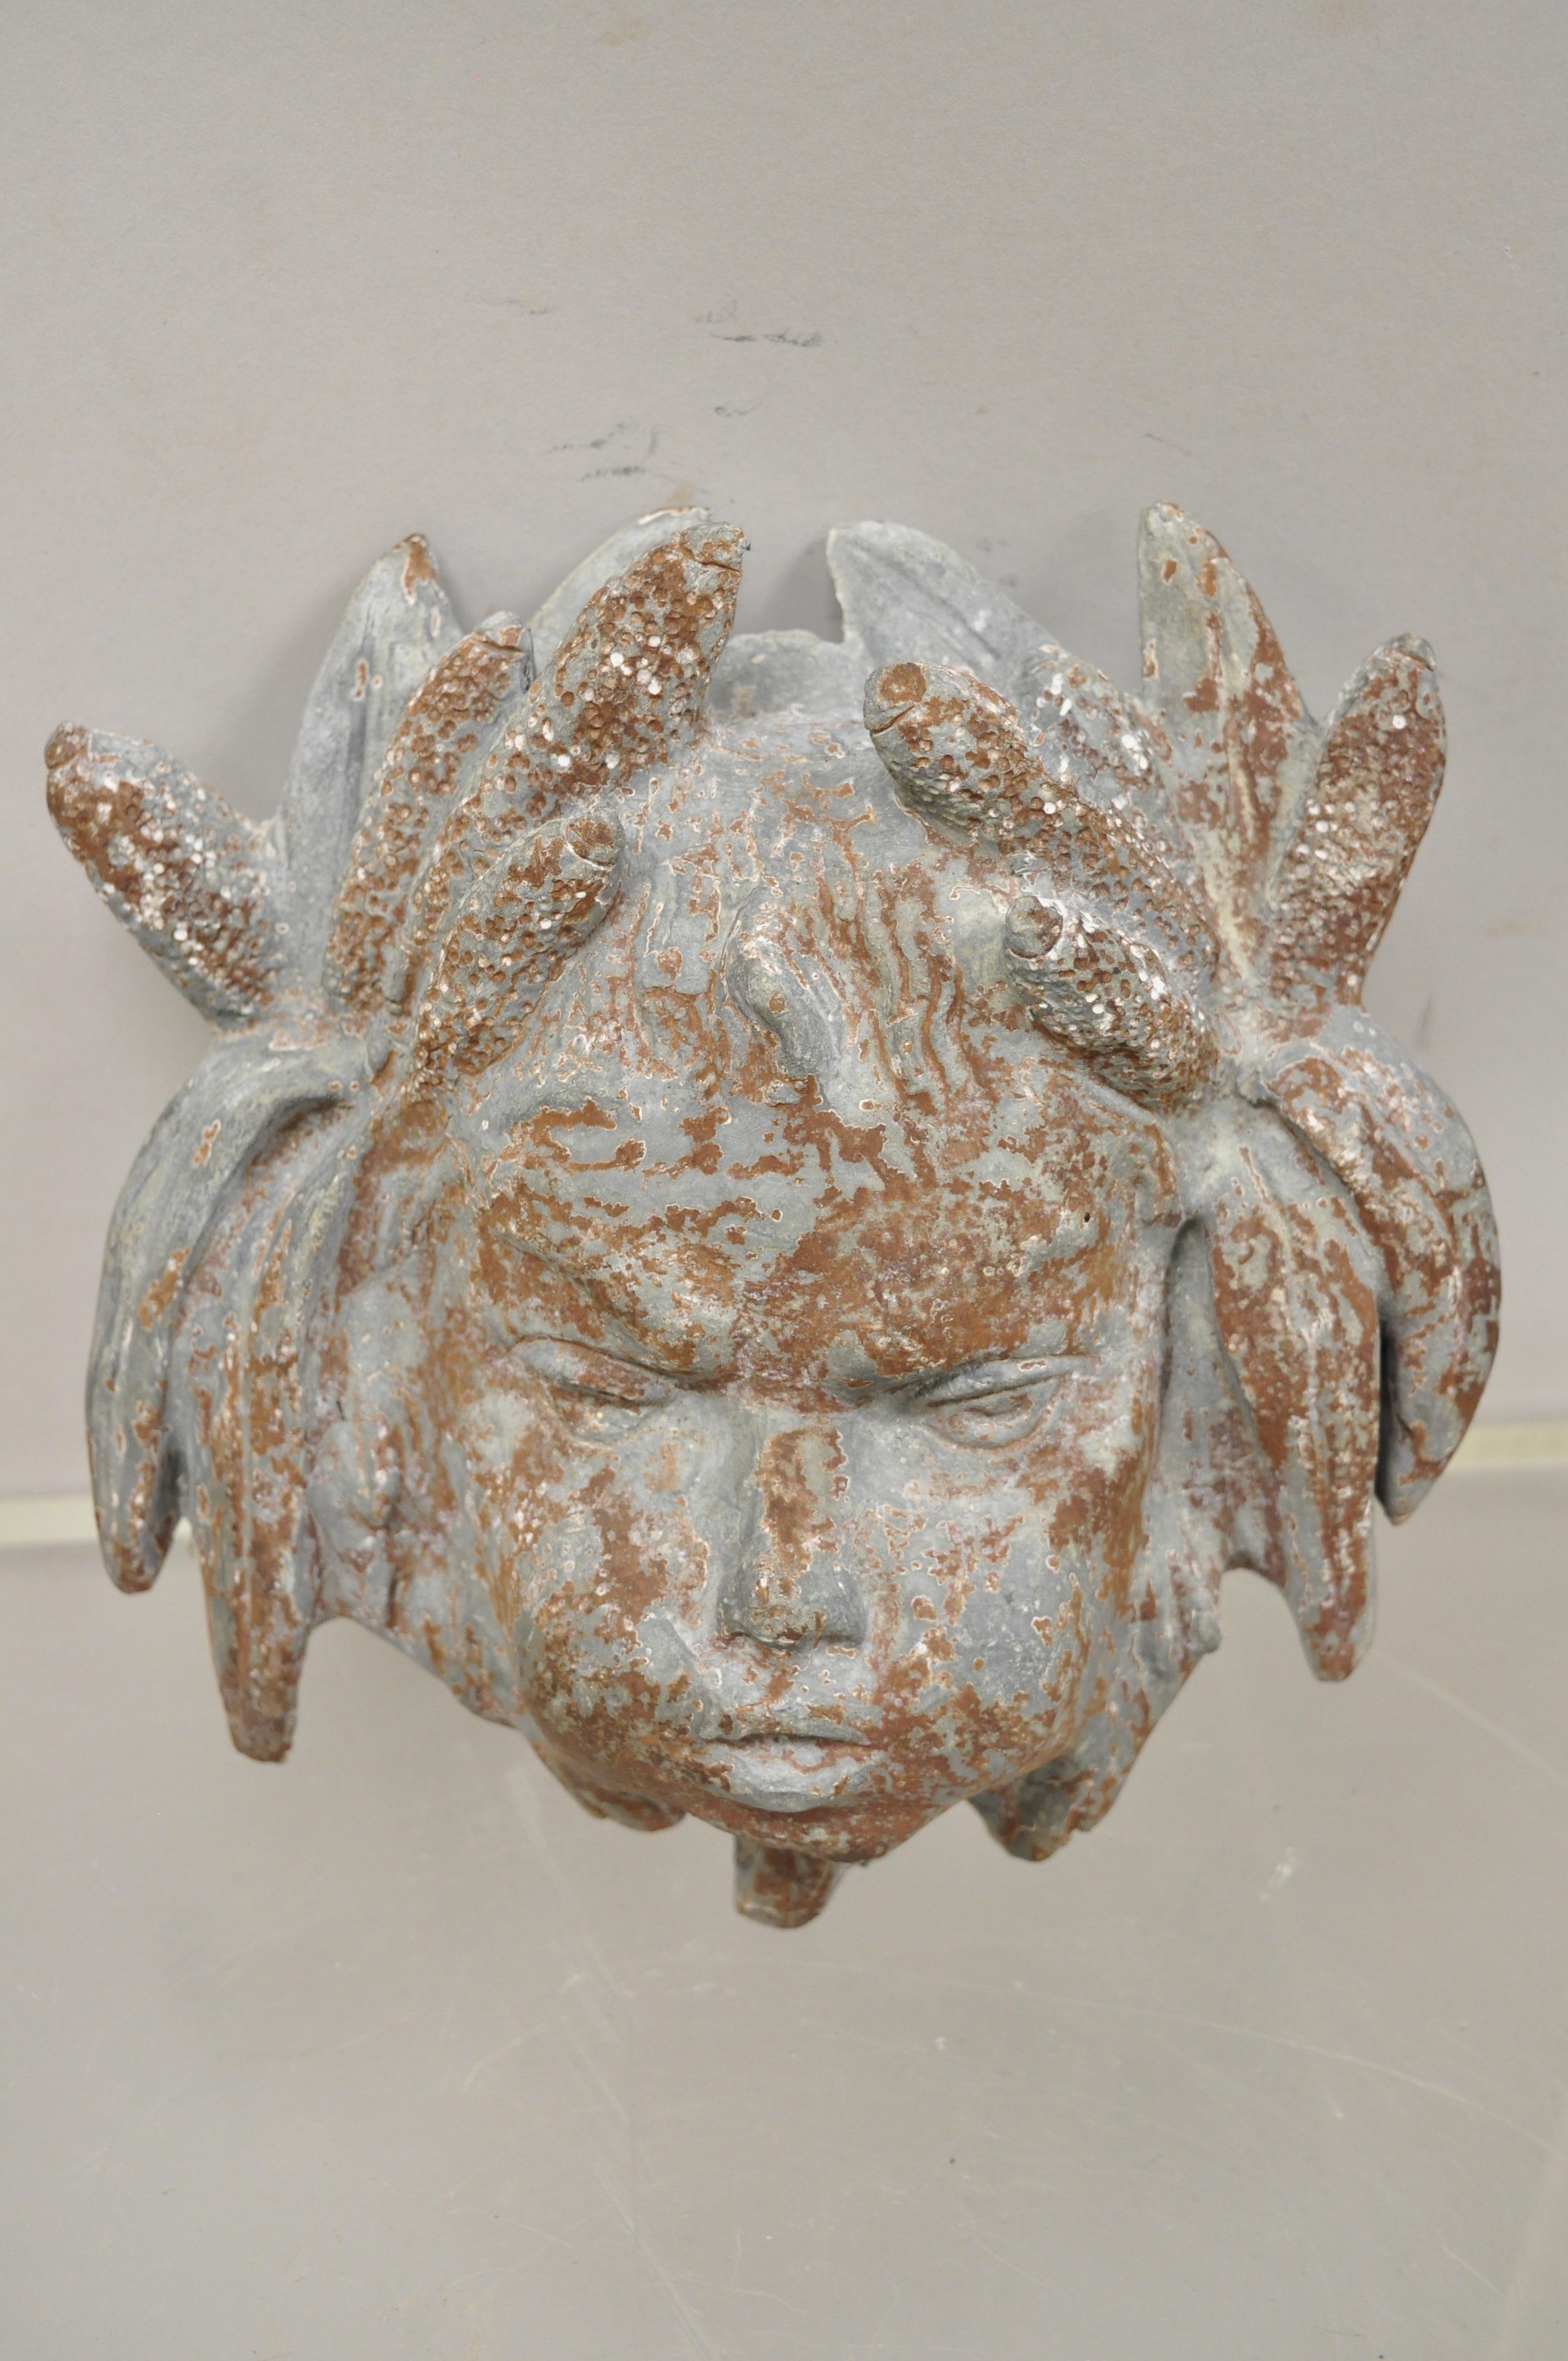 Antique French Neoclassical Small Lead Cherub Head Wall Fountain Garden Art. Item features a cast lead form, wonderful detail desirable patina, very nice item, great style and form, approx. 5lbs. *Does not have hole in the front for water to flow*